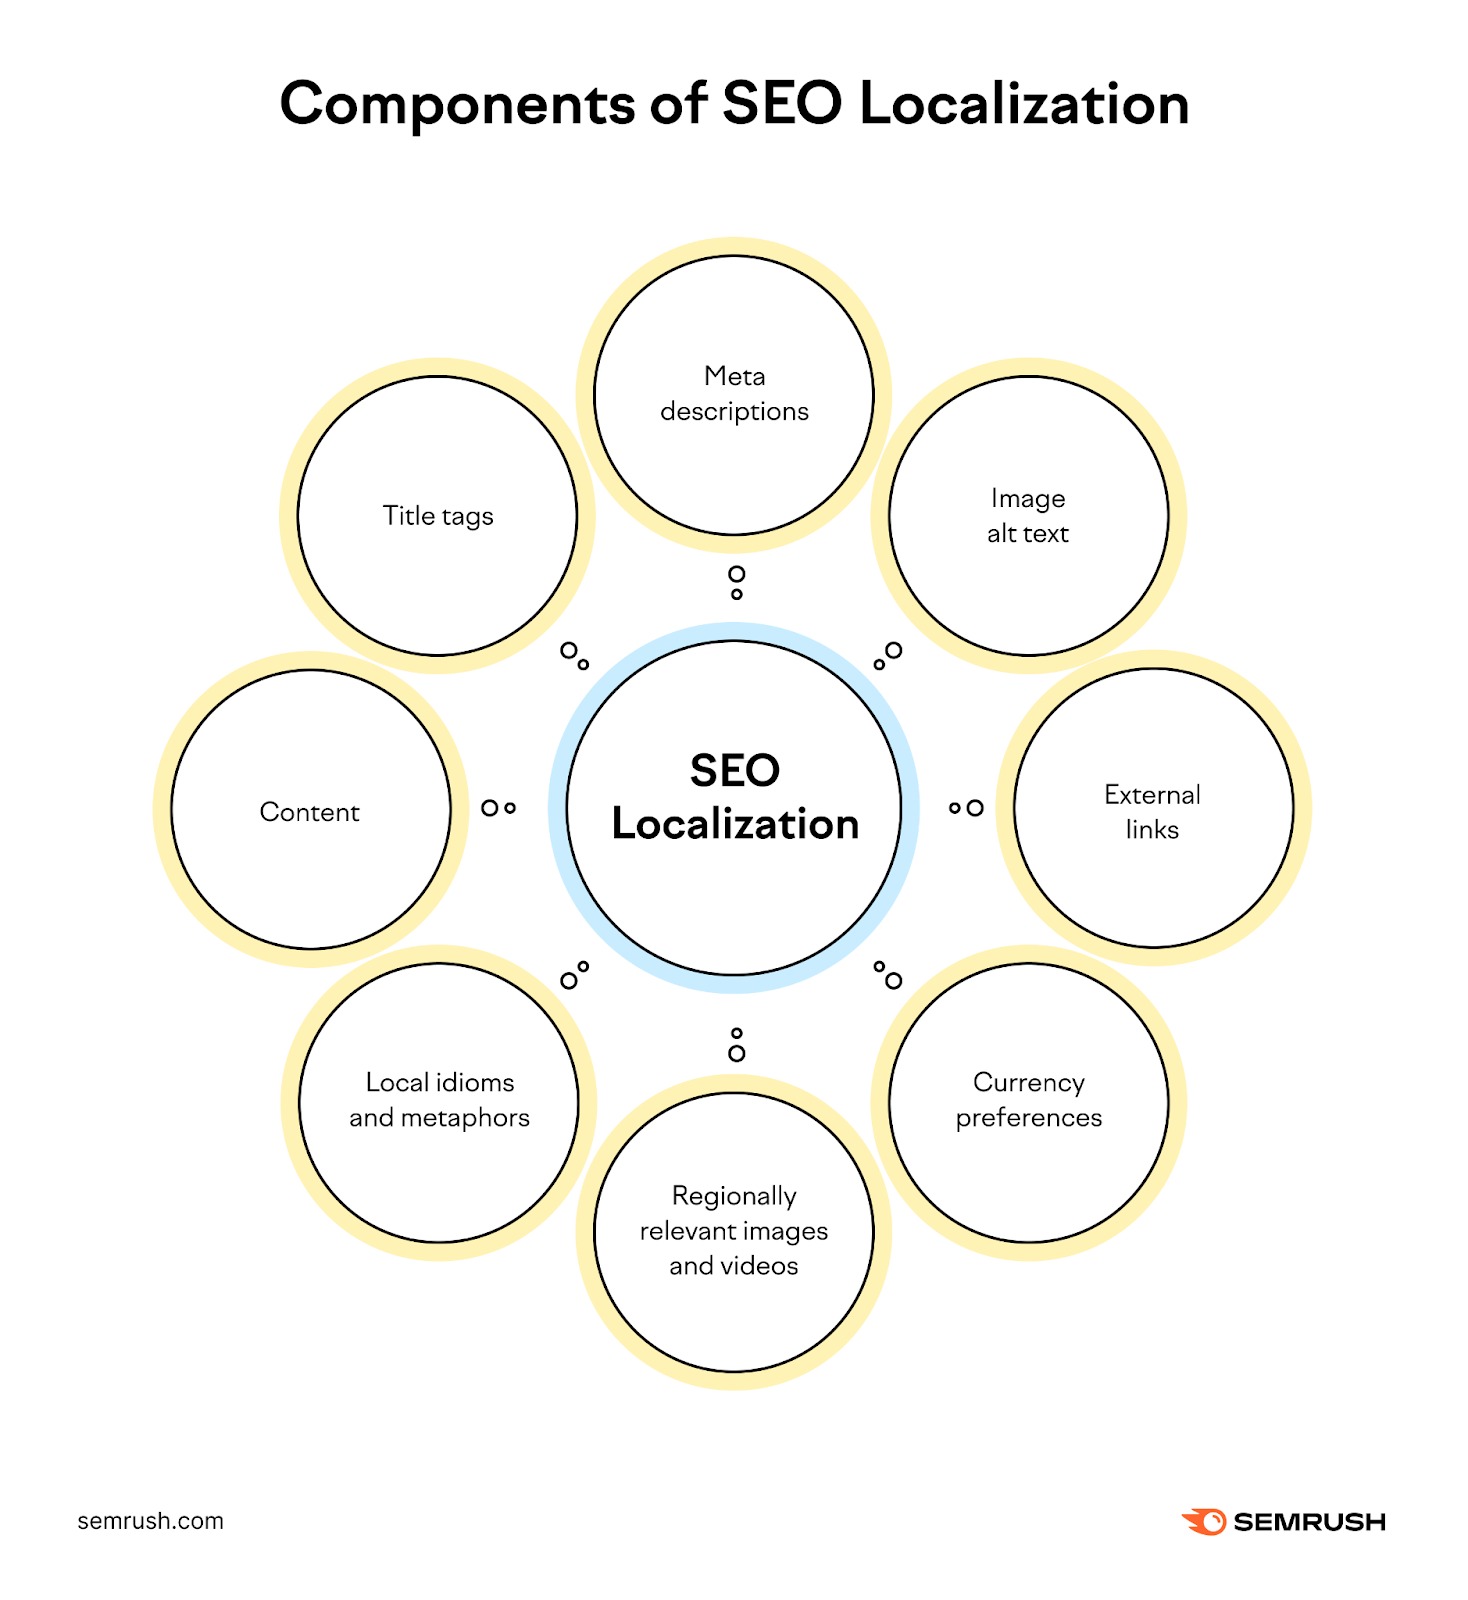 An infographic listing the components of SEO localization